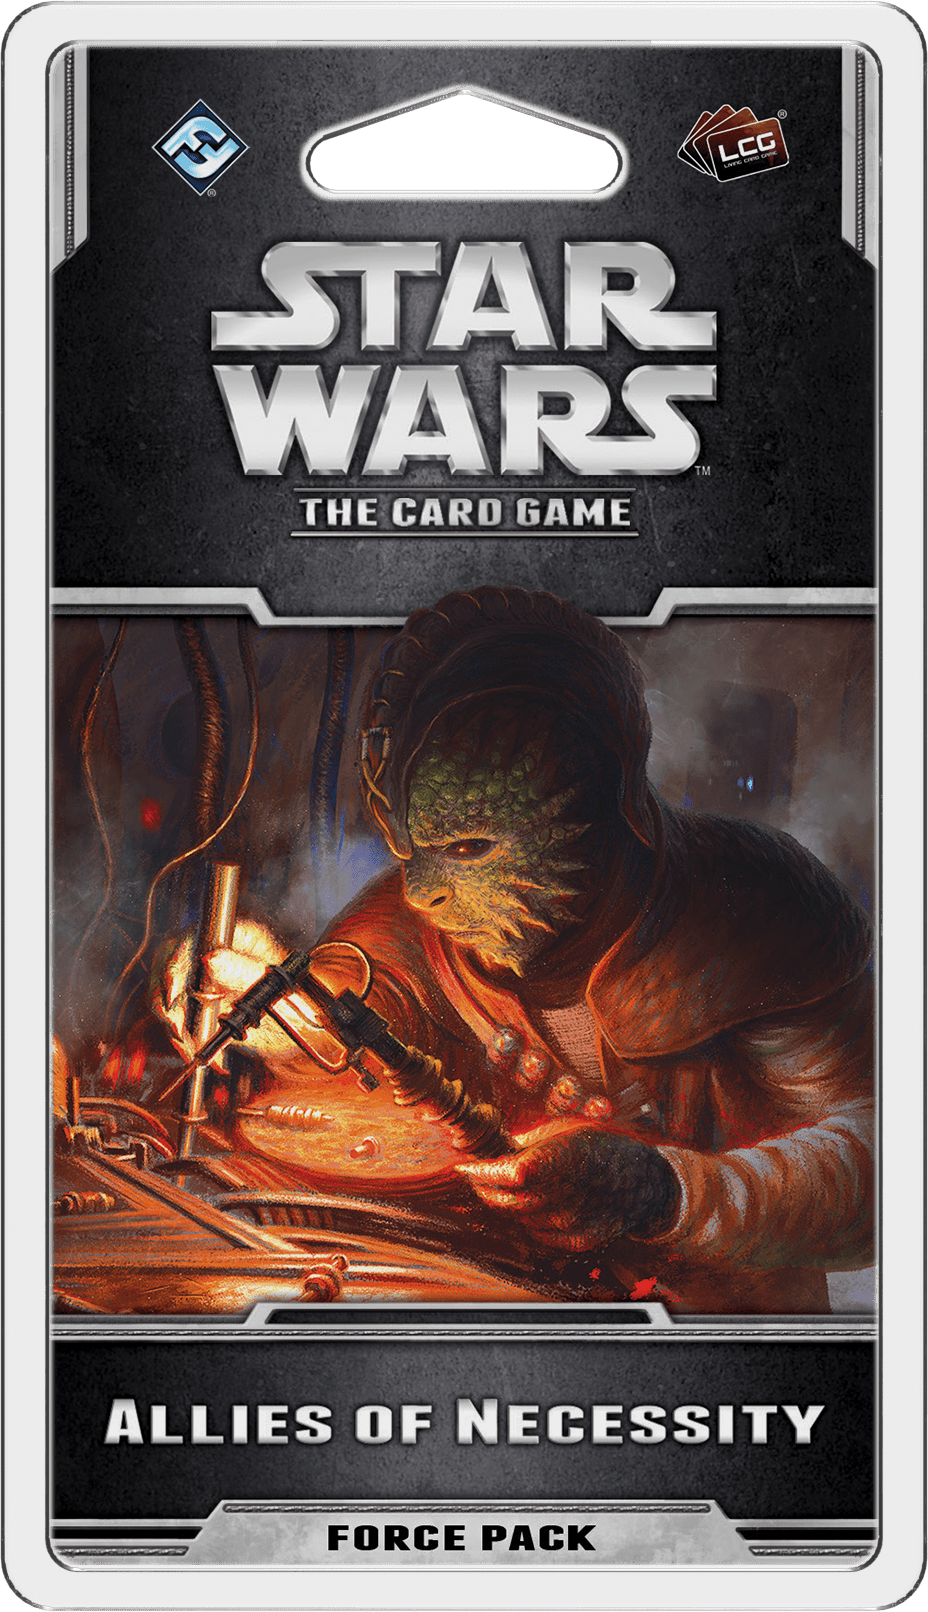 Star Wars: The Card Game – Allies of Necessity